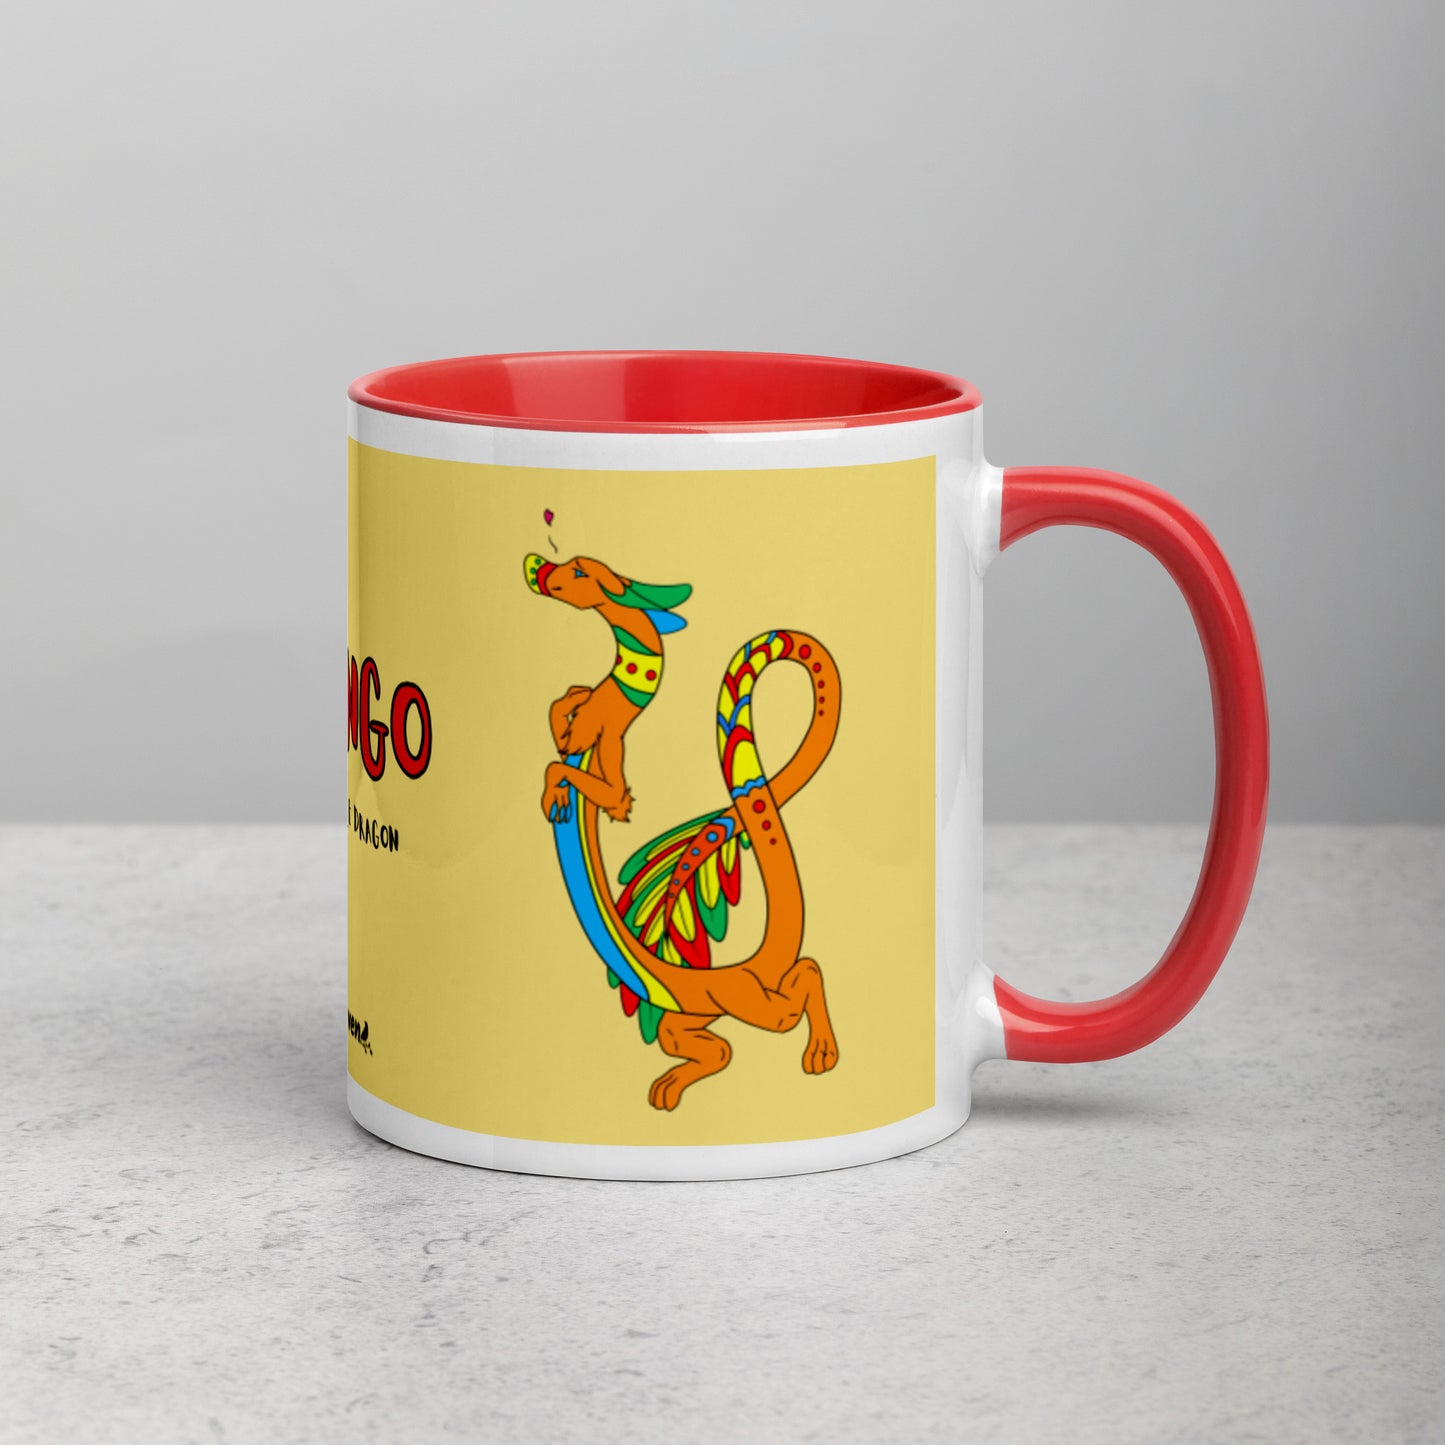 11 ounce white ceramic mug featuring a double-sided image of Domingo the Fuzzy Noodle Dragon against a light yellow background. Red inside and handle color. Shown on tabletop with handle facing right.